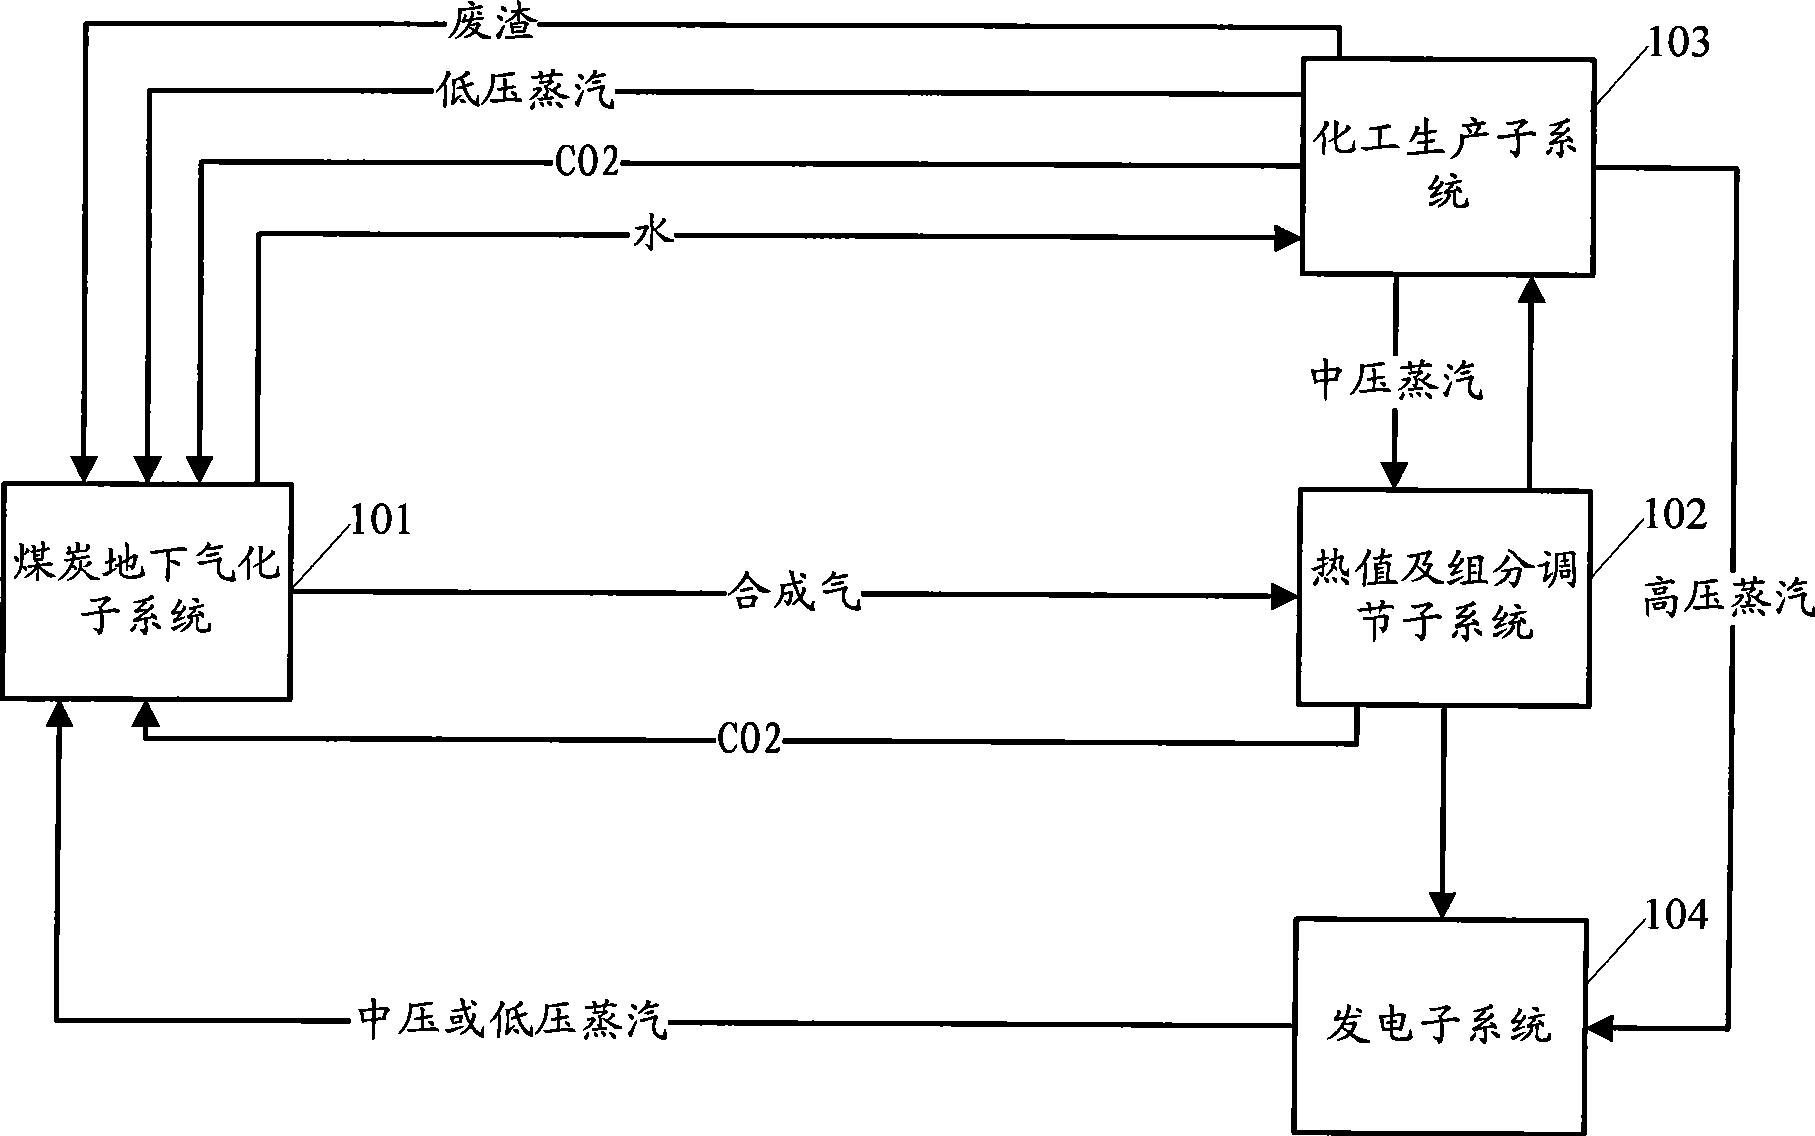 Underground coal gasification multi-combining production system and method